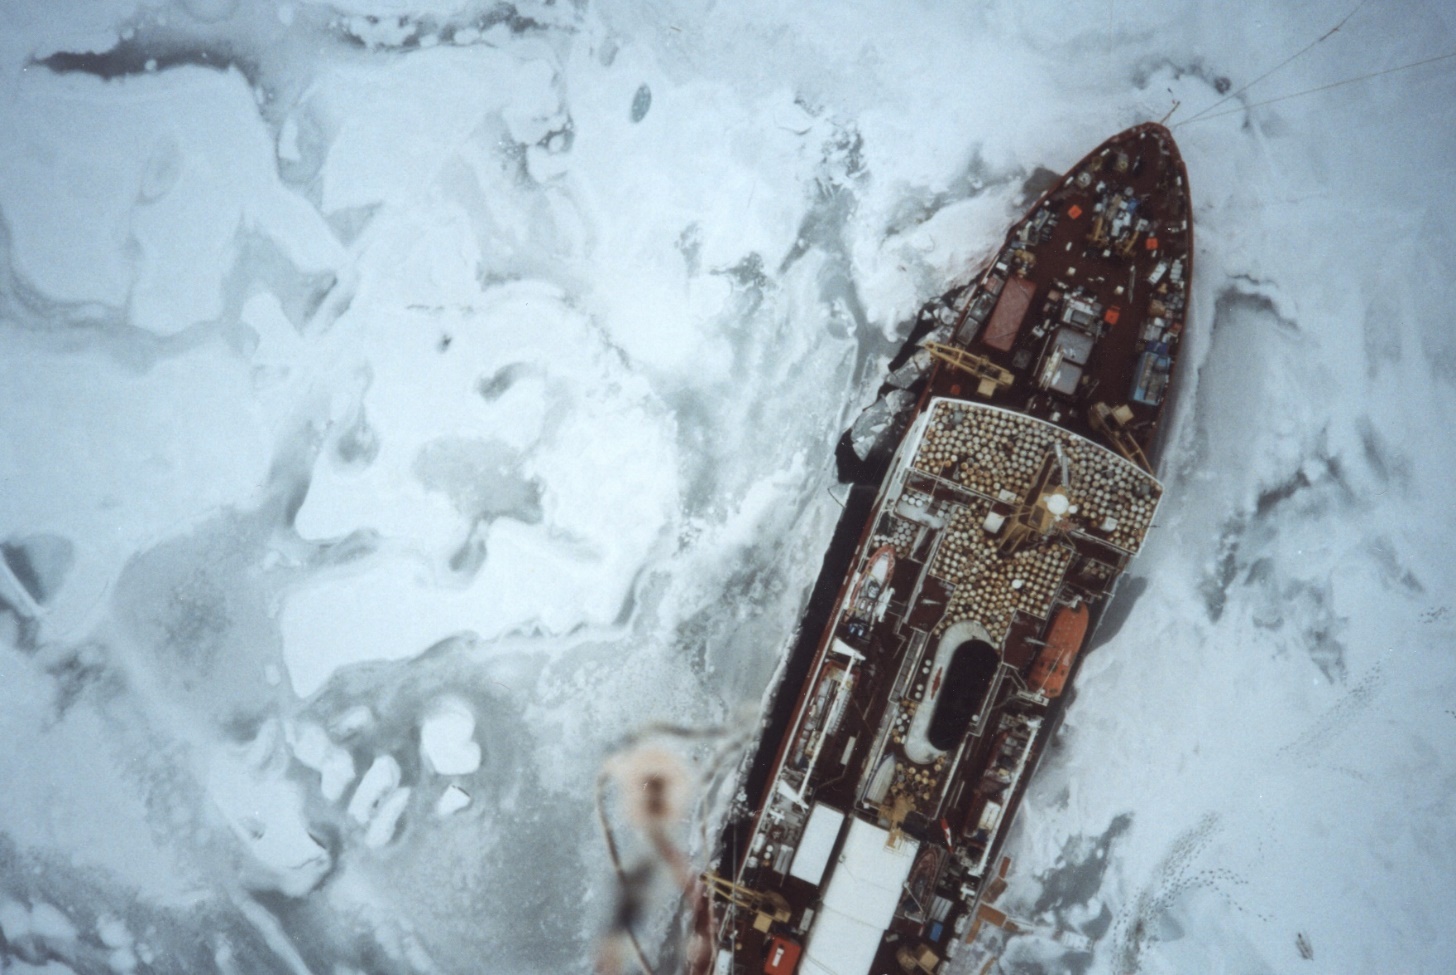 The SHEBA research icebreaker cuts through arctic ice.